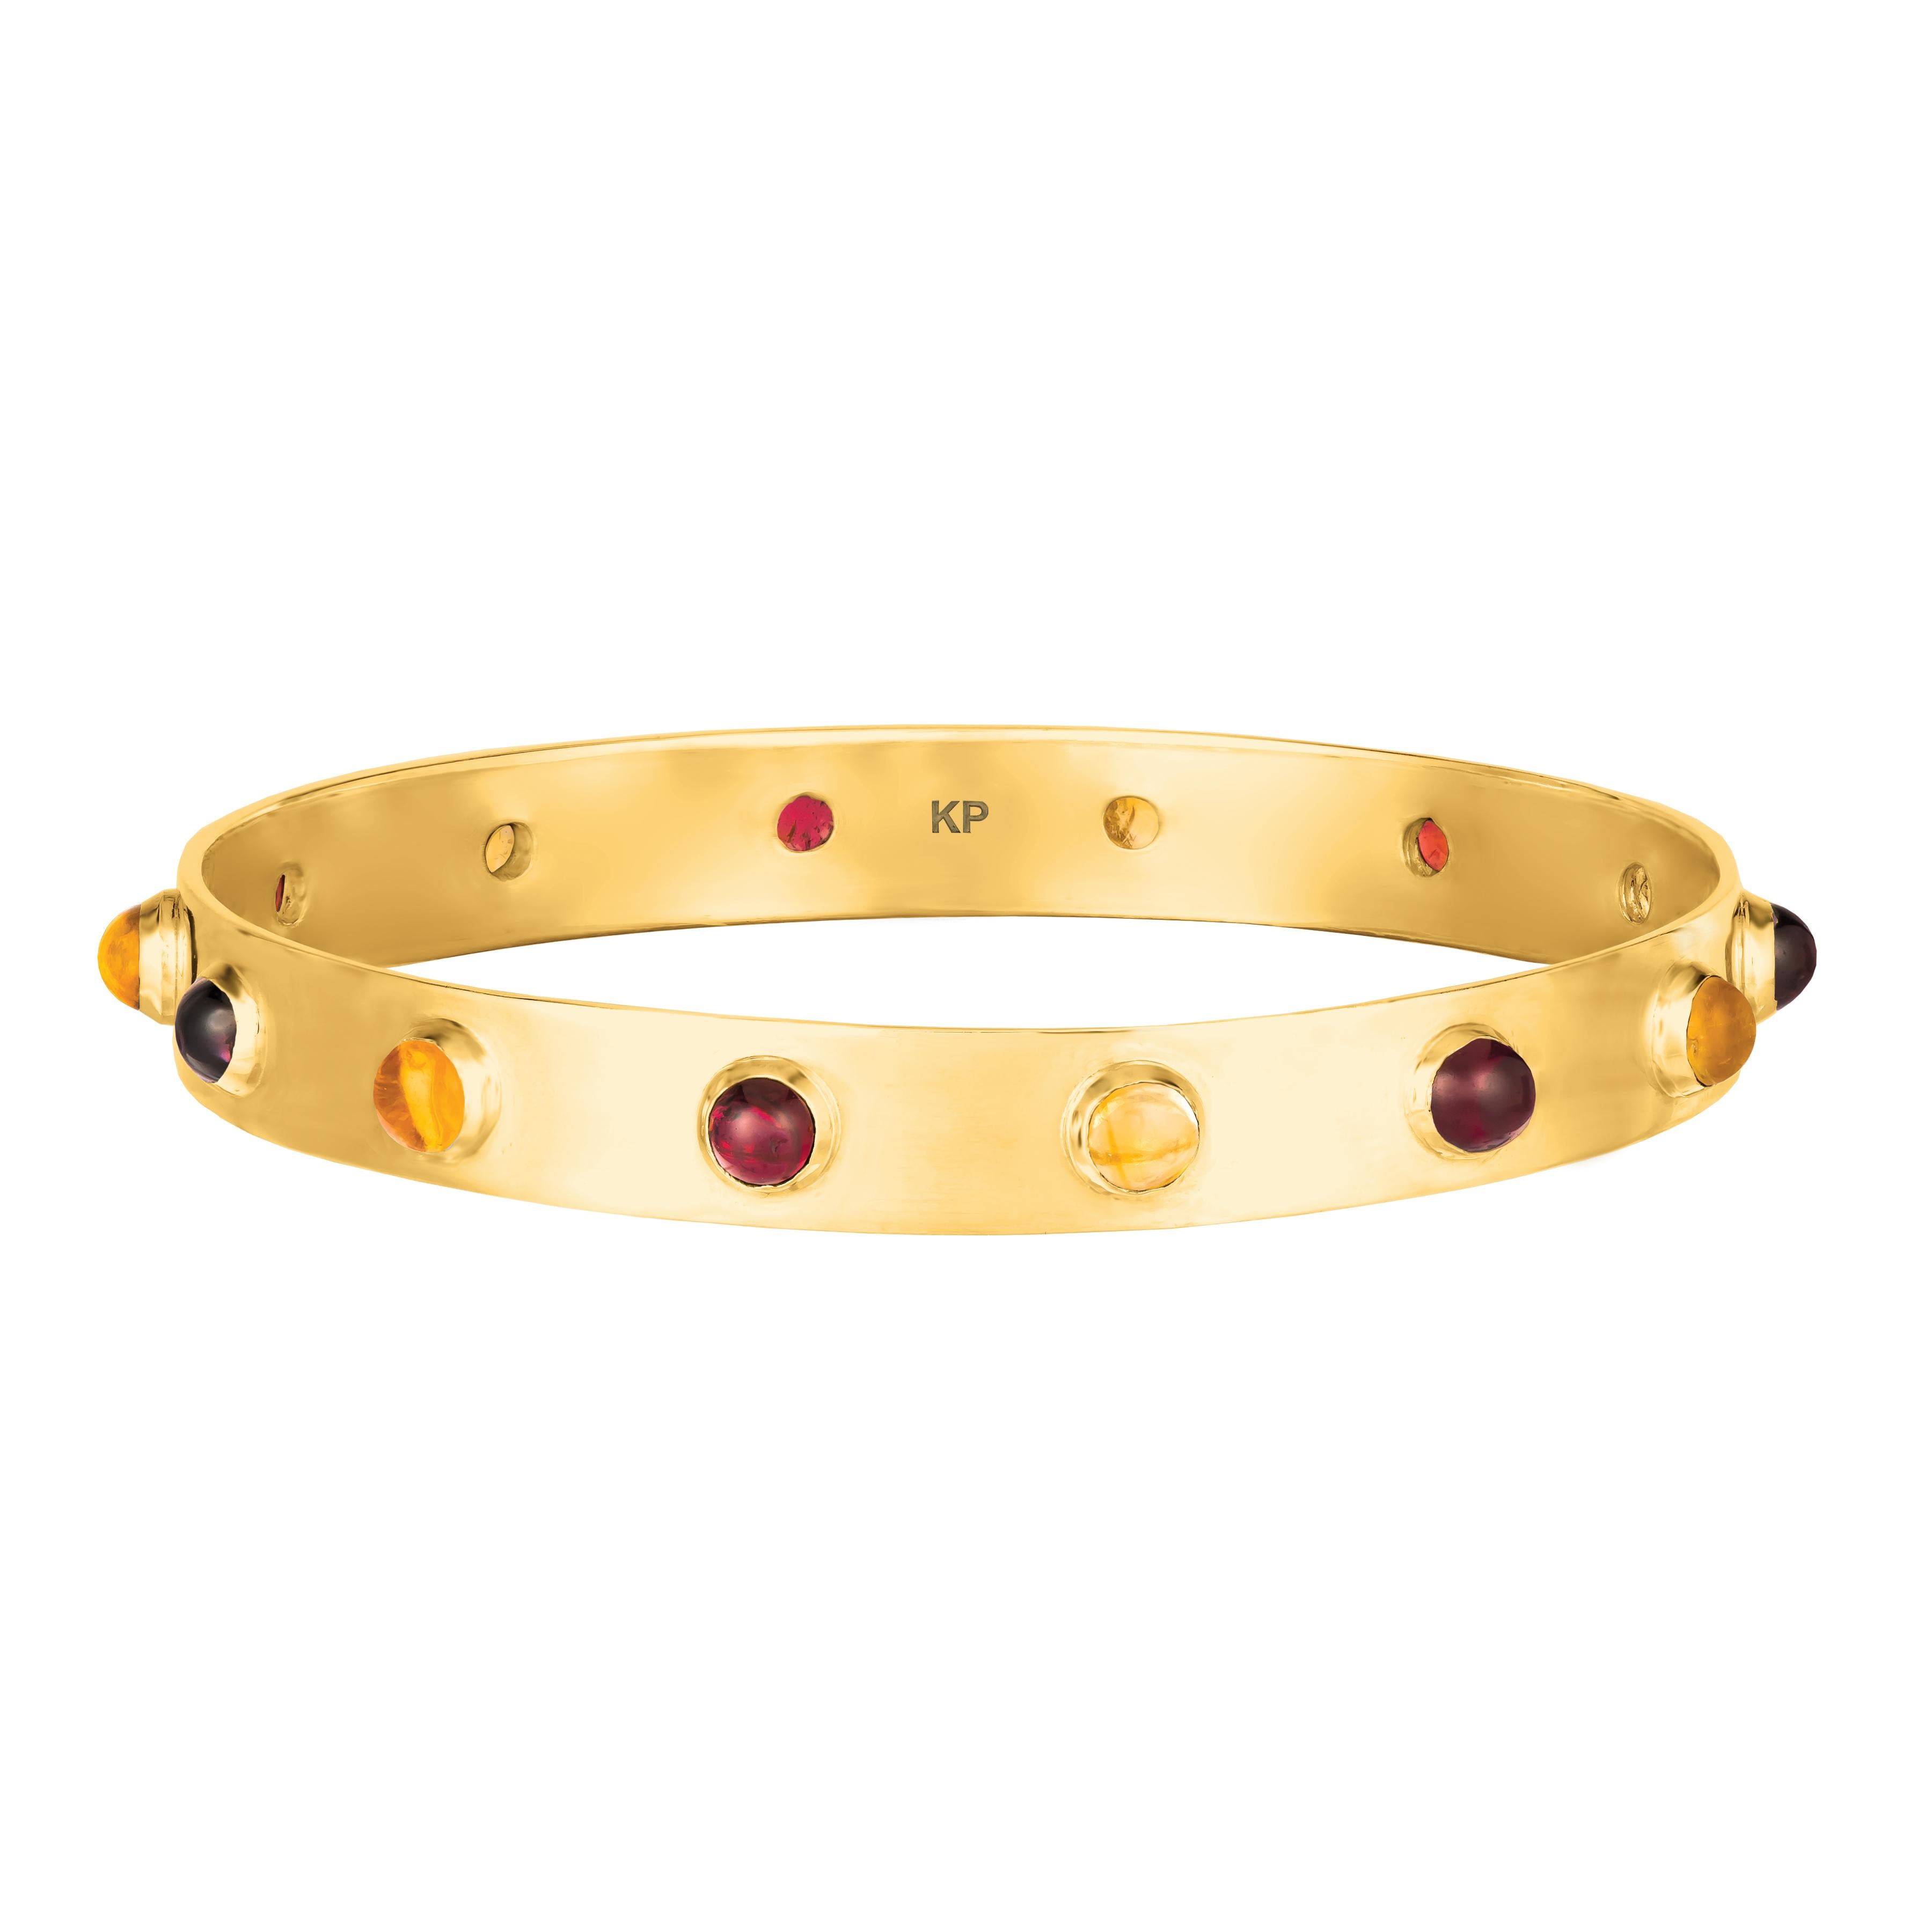 This bangle in Sterling Silver bracelet is the ideal accessory to a daytime or evening outfit, thanks to its sleek style, it is easy to slide on and take off. Its all-around stones feature a vivid splash of colors with cabernet red garnet, lemon